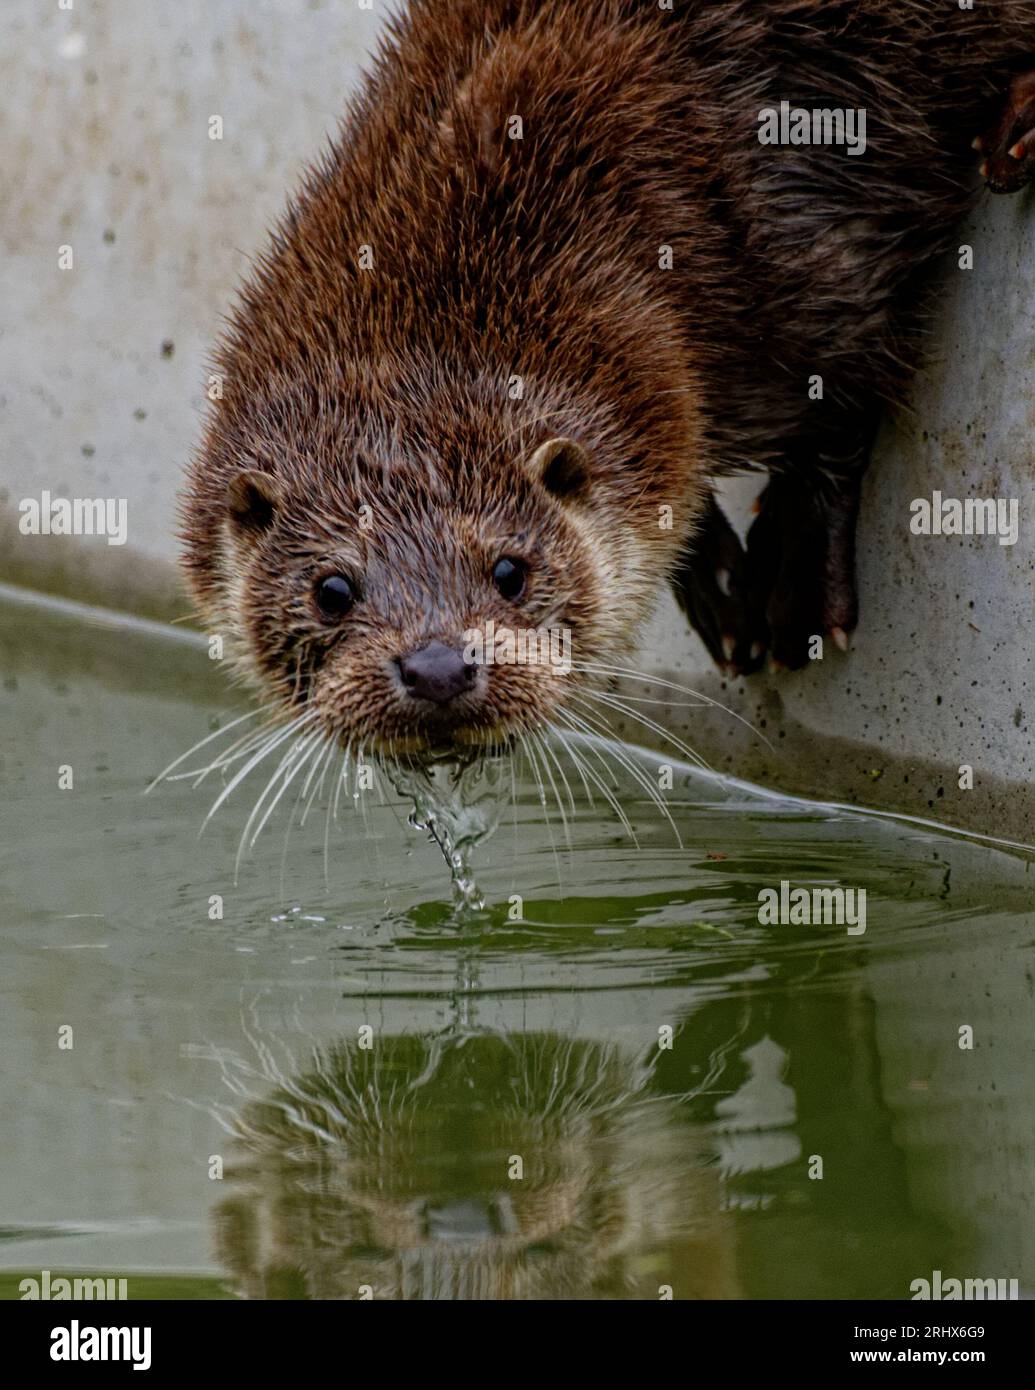 Eurasian Otter (Lutra lutra) Juvenile about to enter water with reflection. Stock Photo